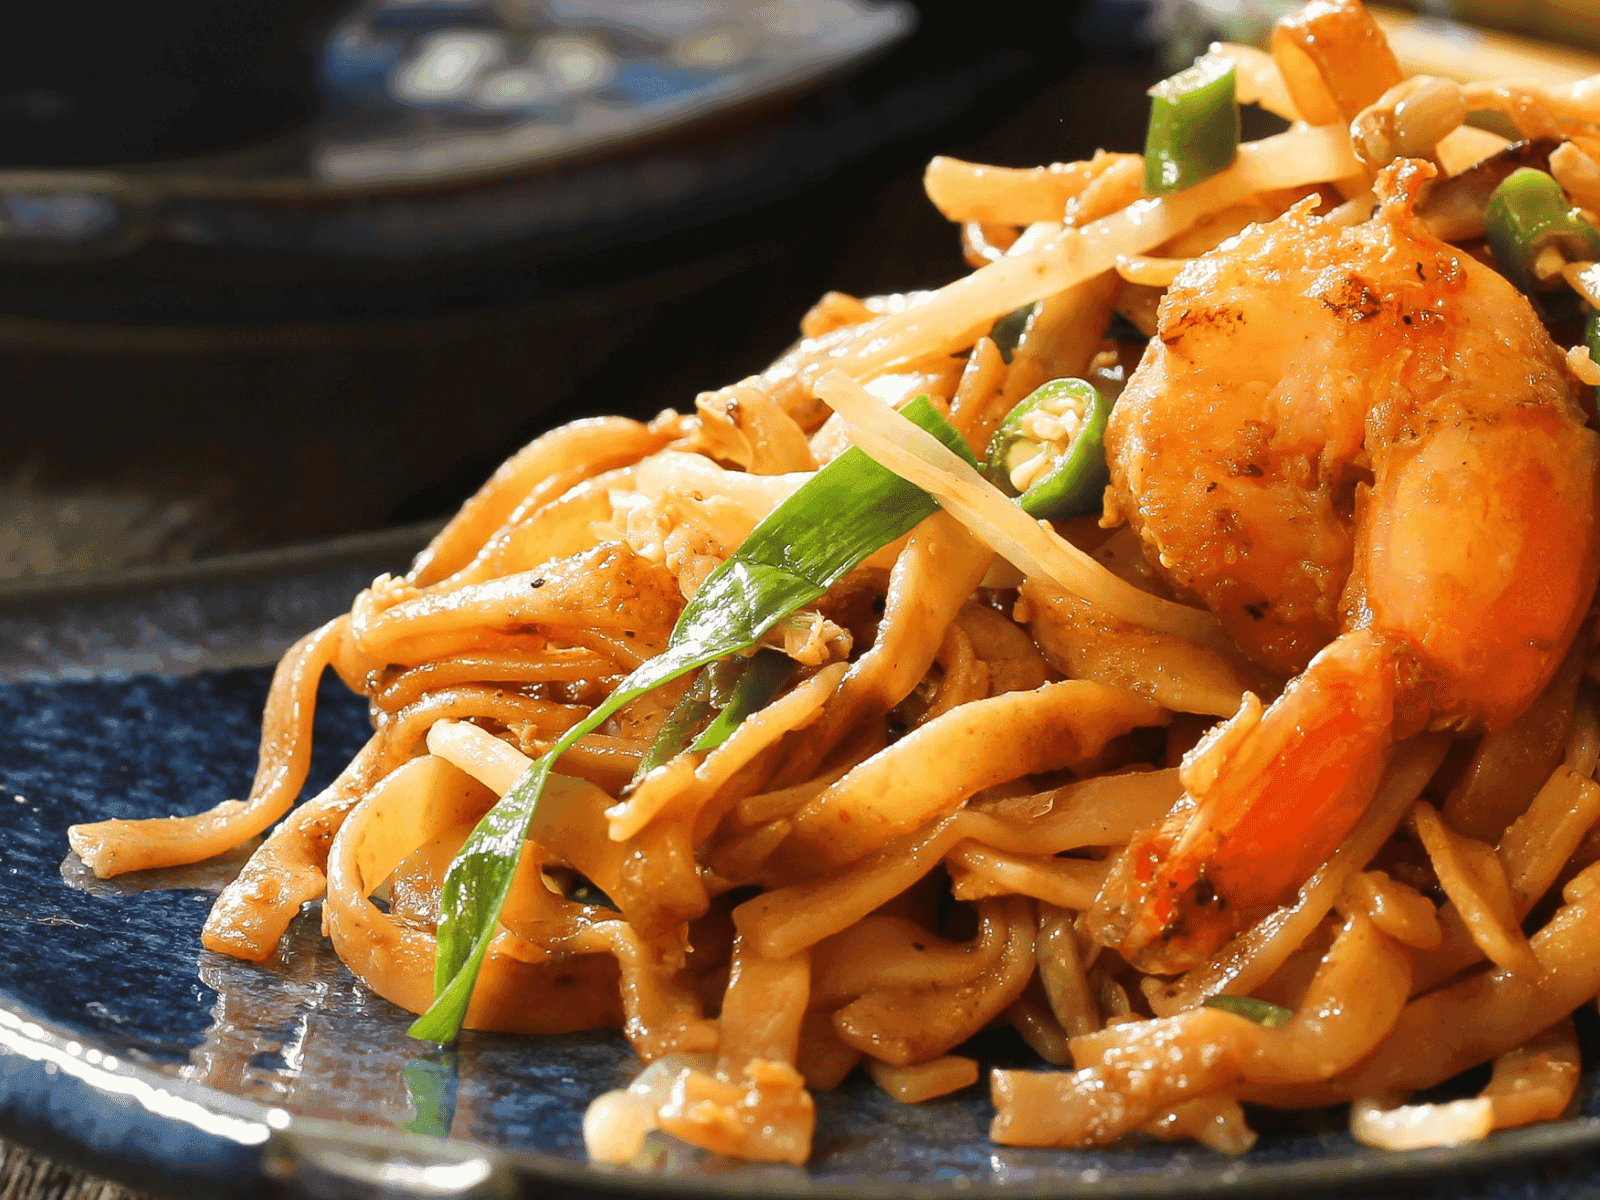 Malaysian Char Kway Teow dish | Dine & Chill offer at St. Giles Southkey Hotel